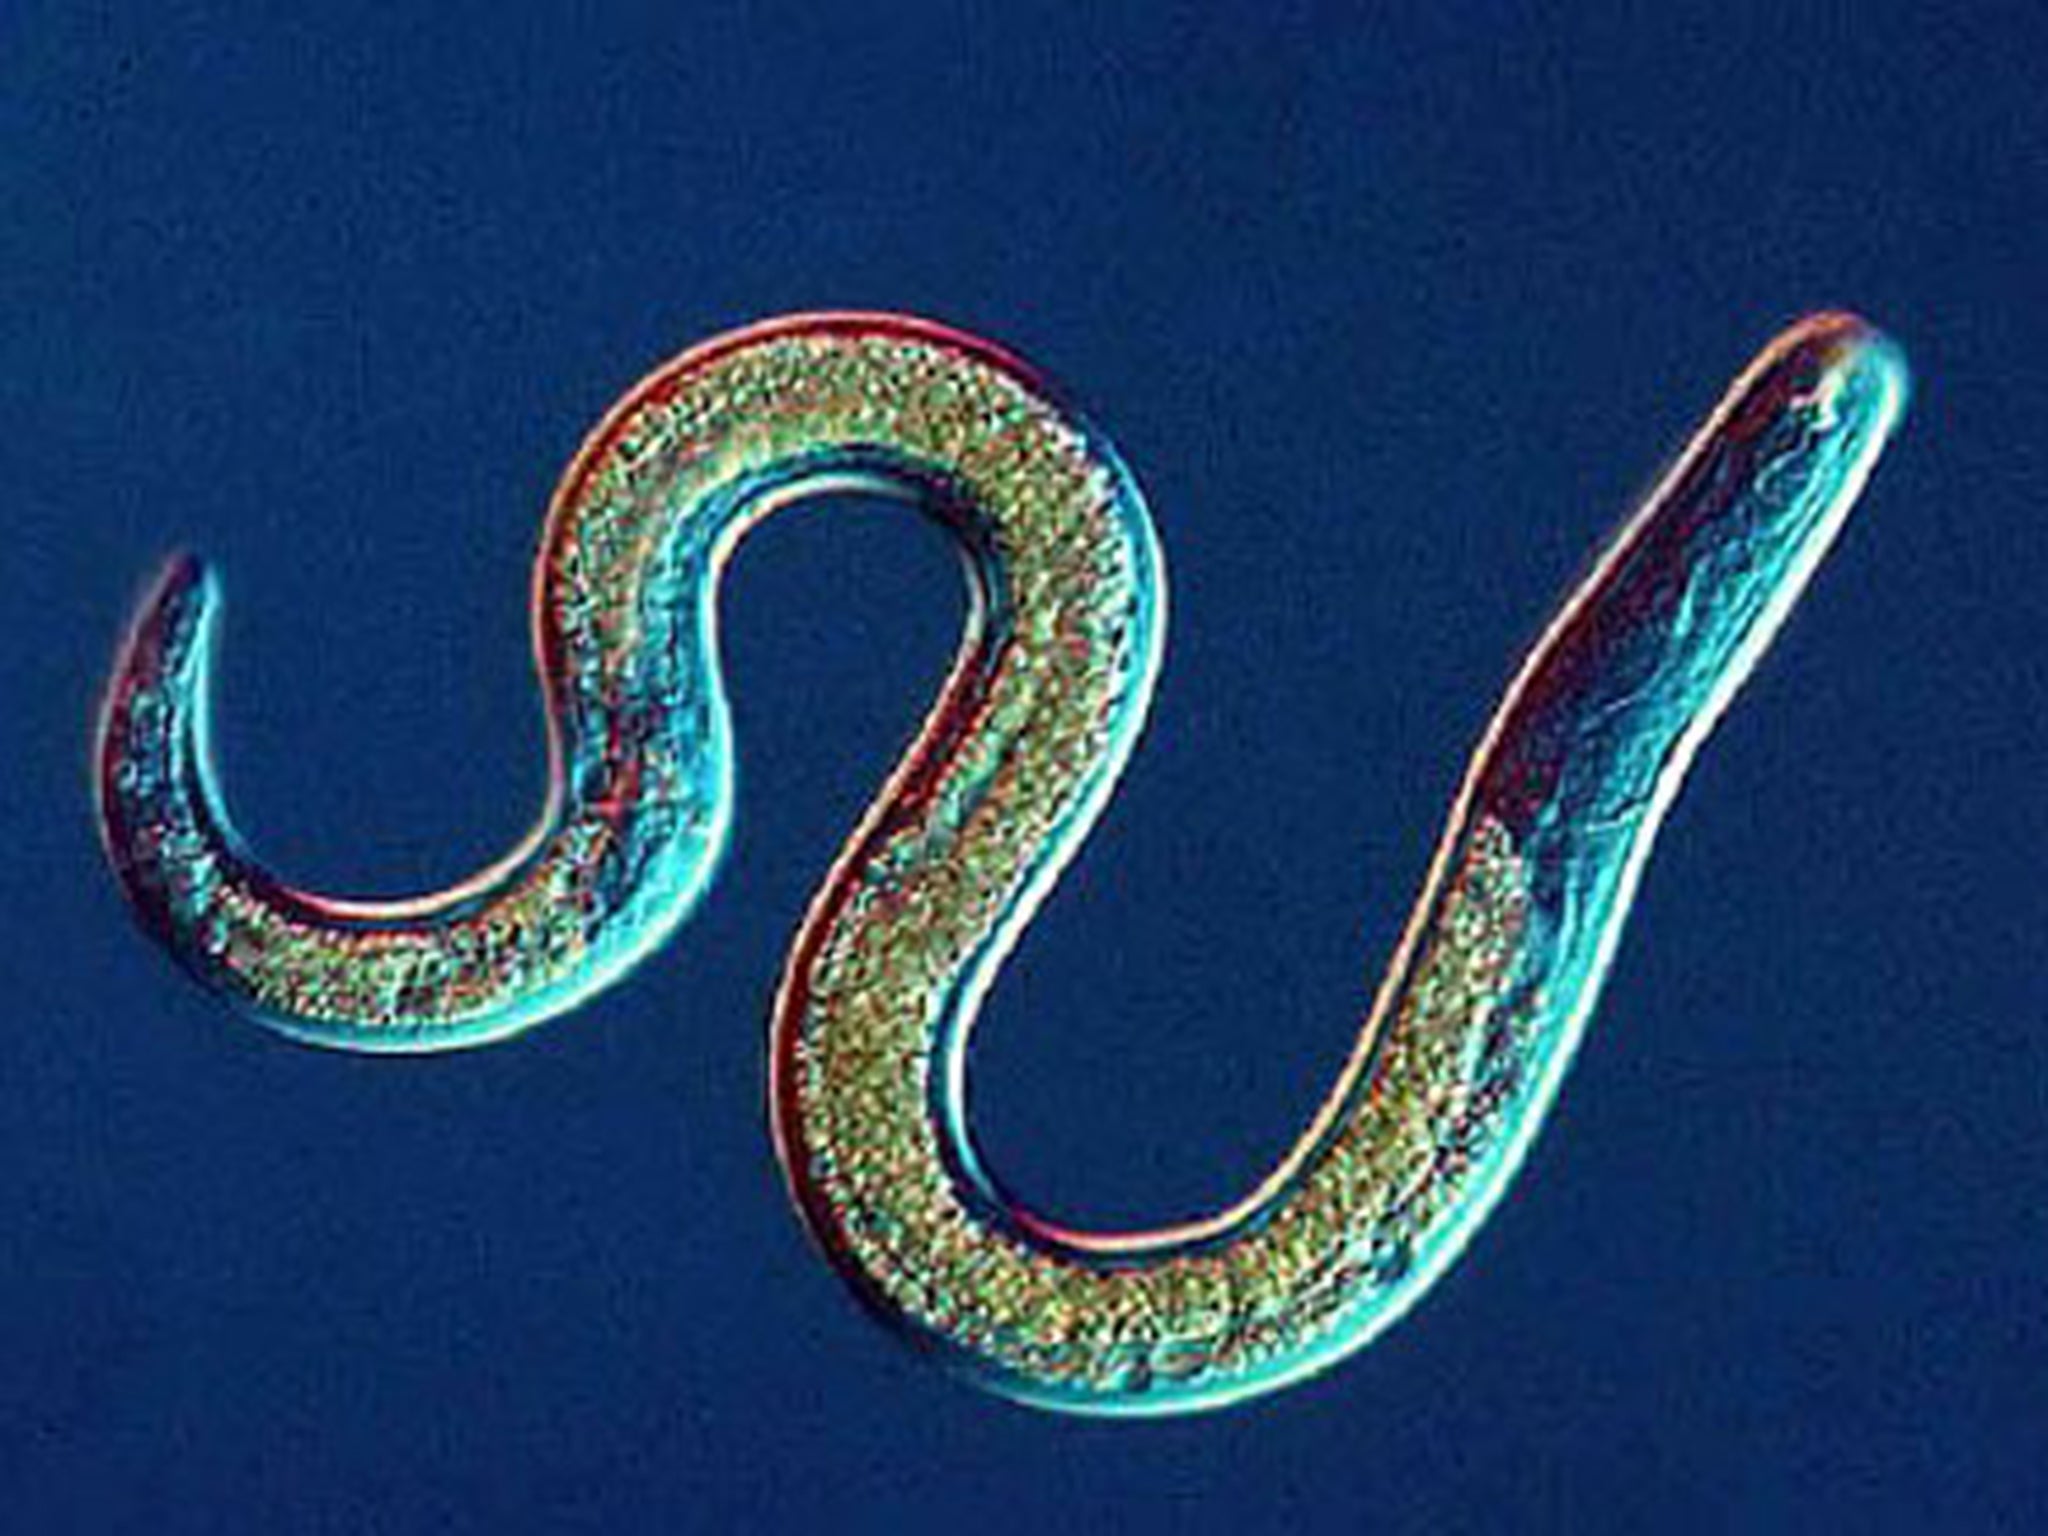 Nematodes are the most numerous multicellular animals on earth. A handful of soil will contain thousands of the microscopic worms, many of them parasites of insects, plants or animals